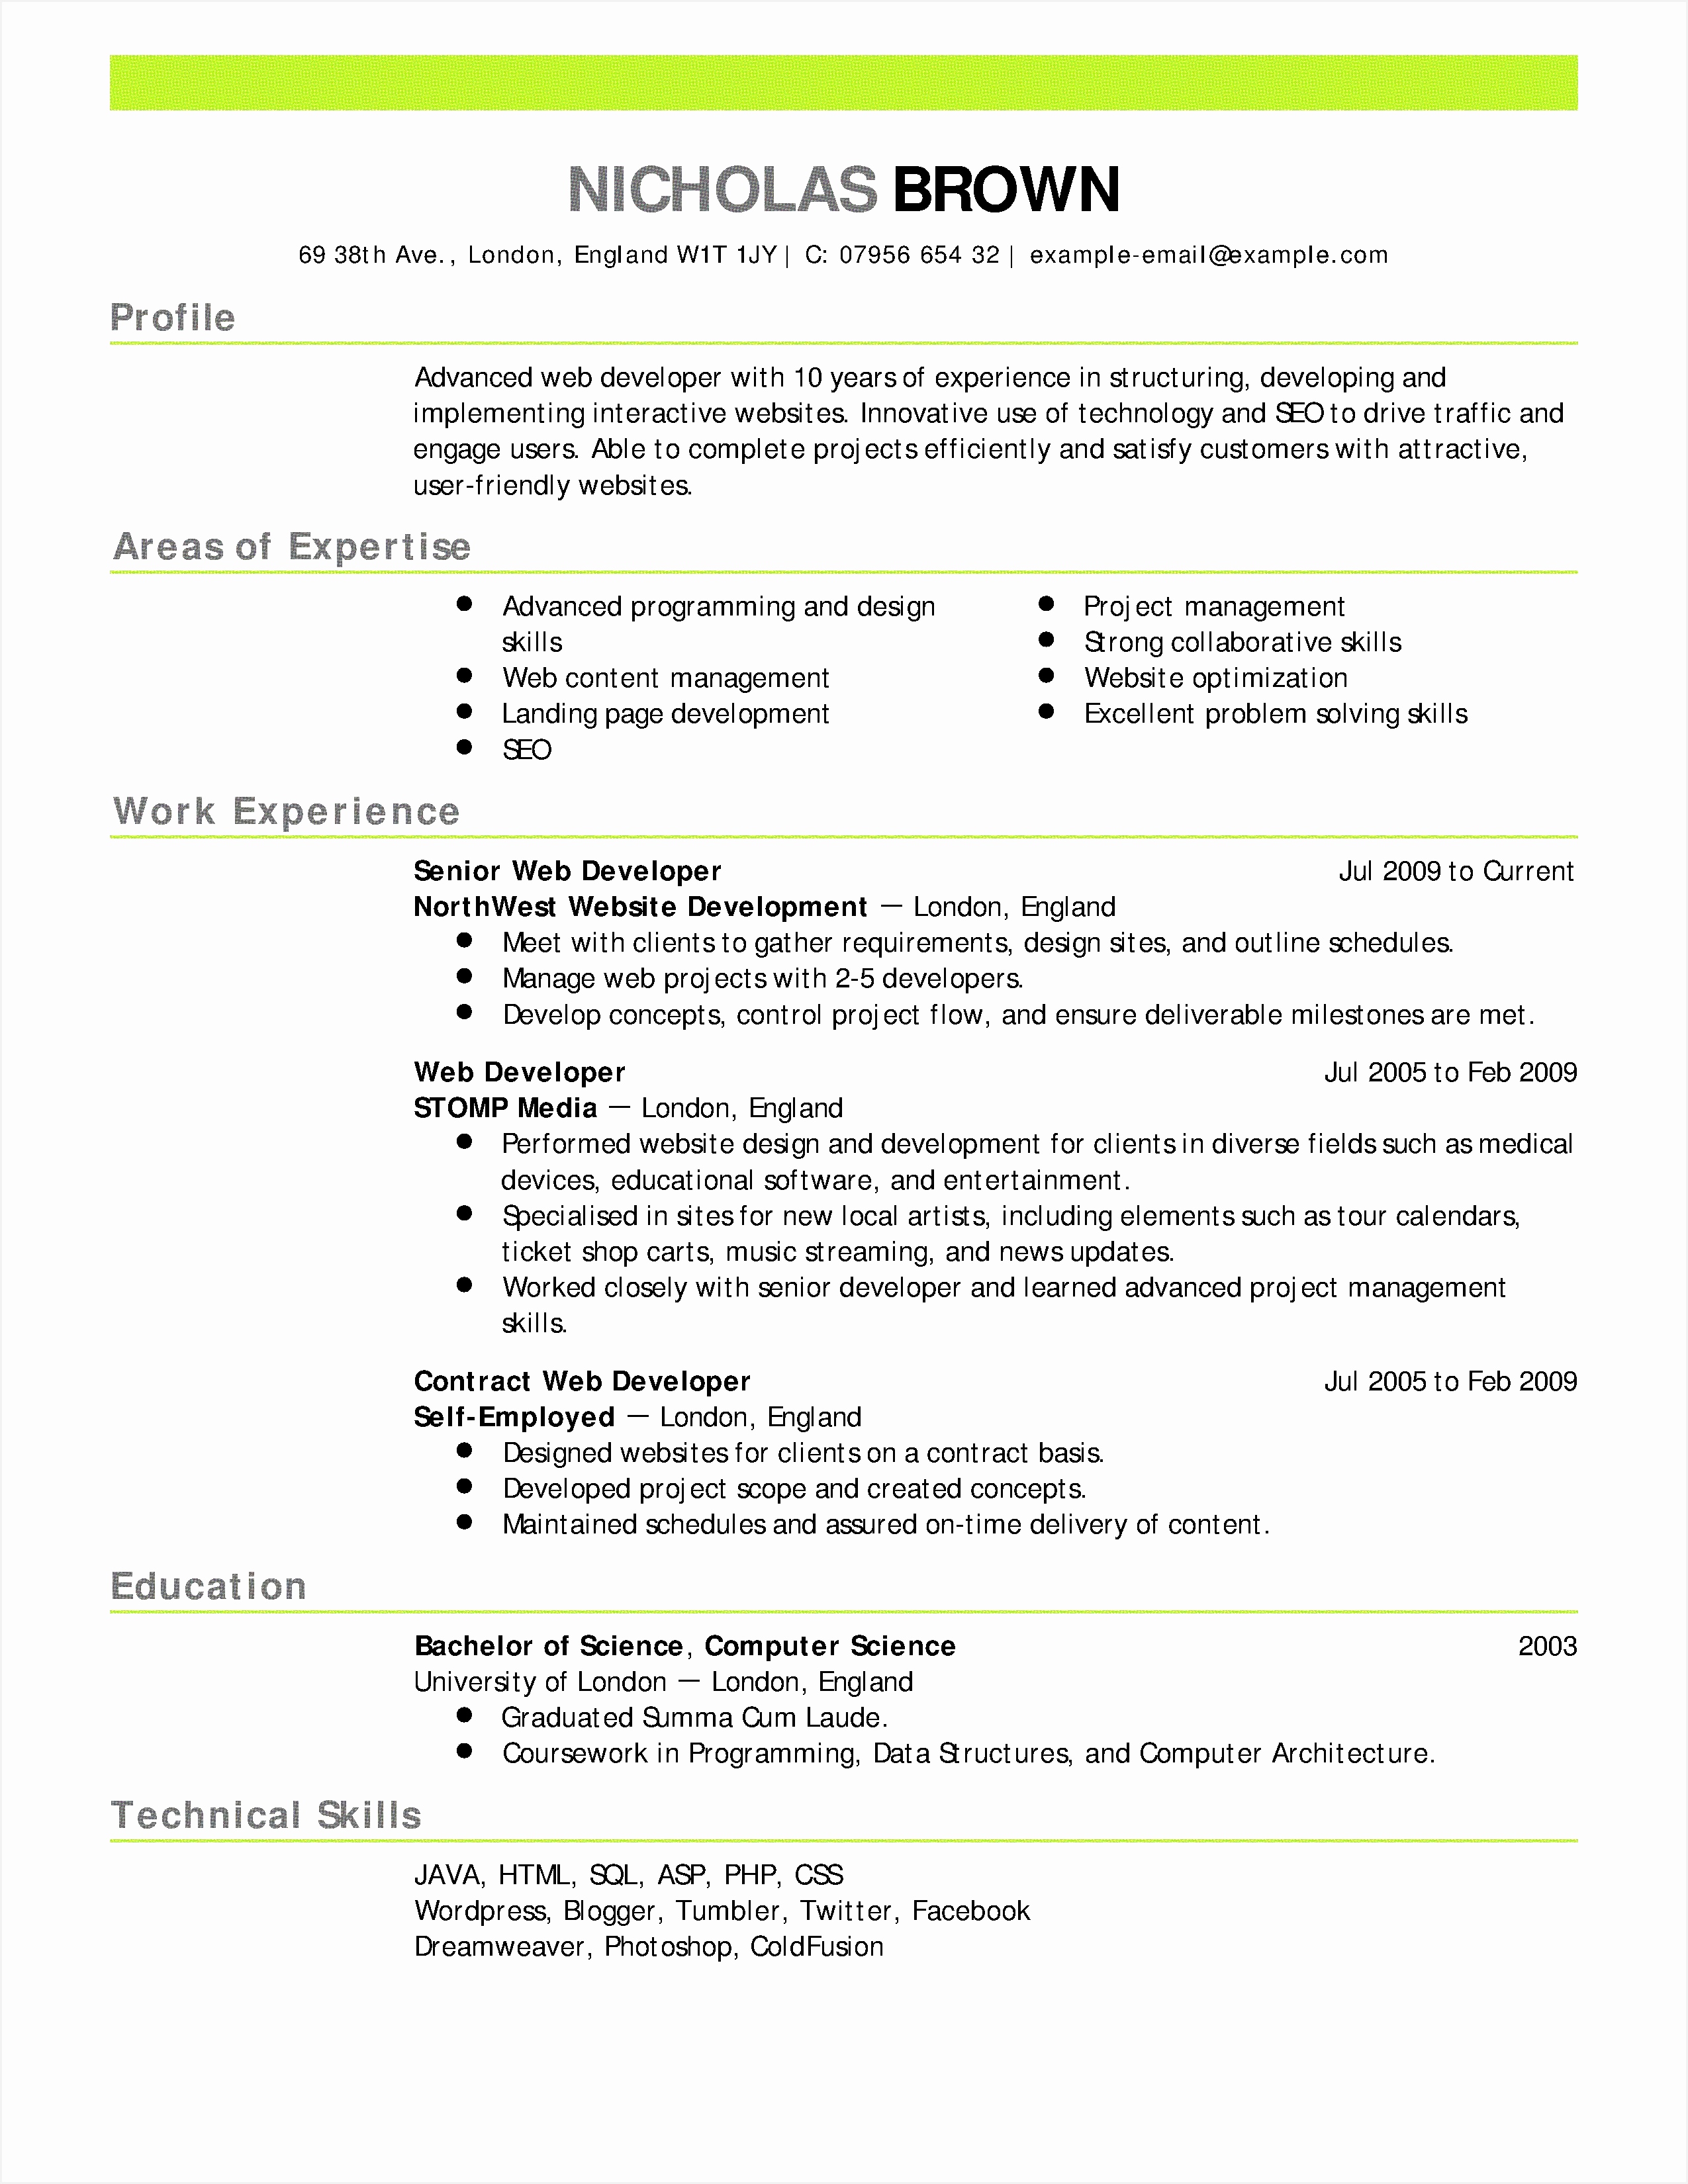 Free Resume Templates In Word format Luxury Professional Job Resume Template Od Specialist Cover Letter Lead33002550